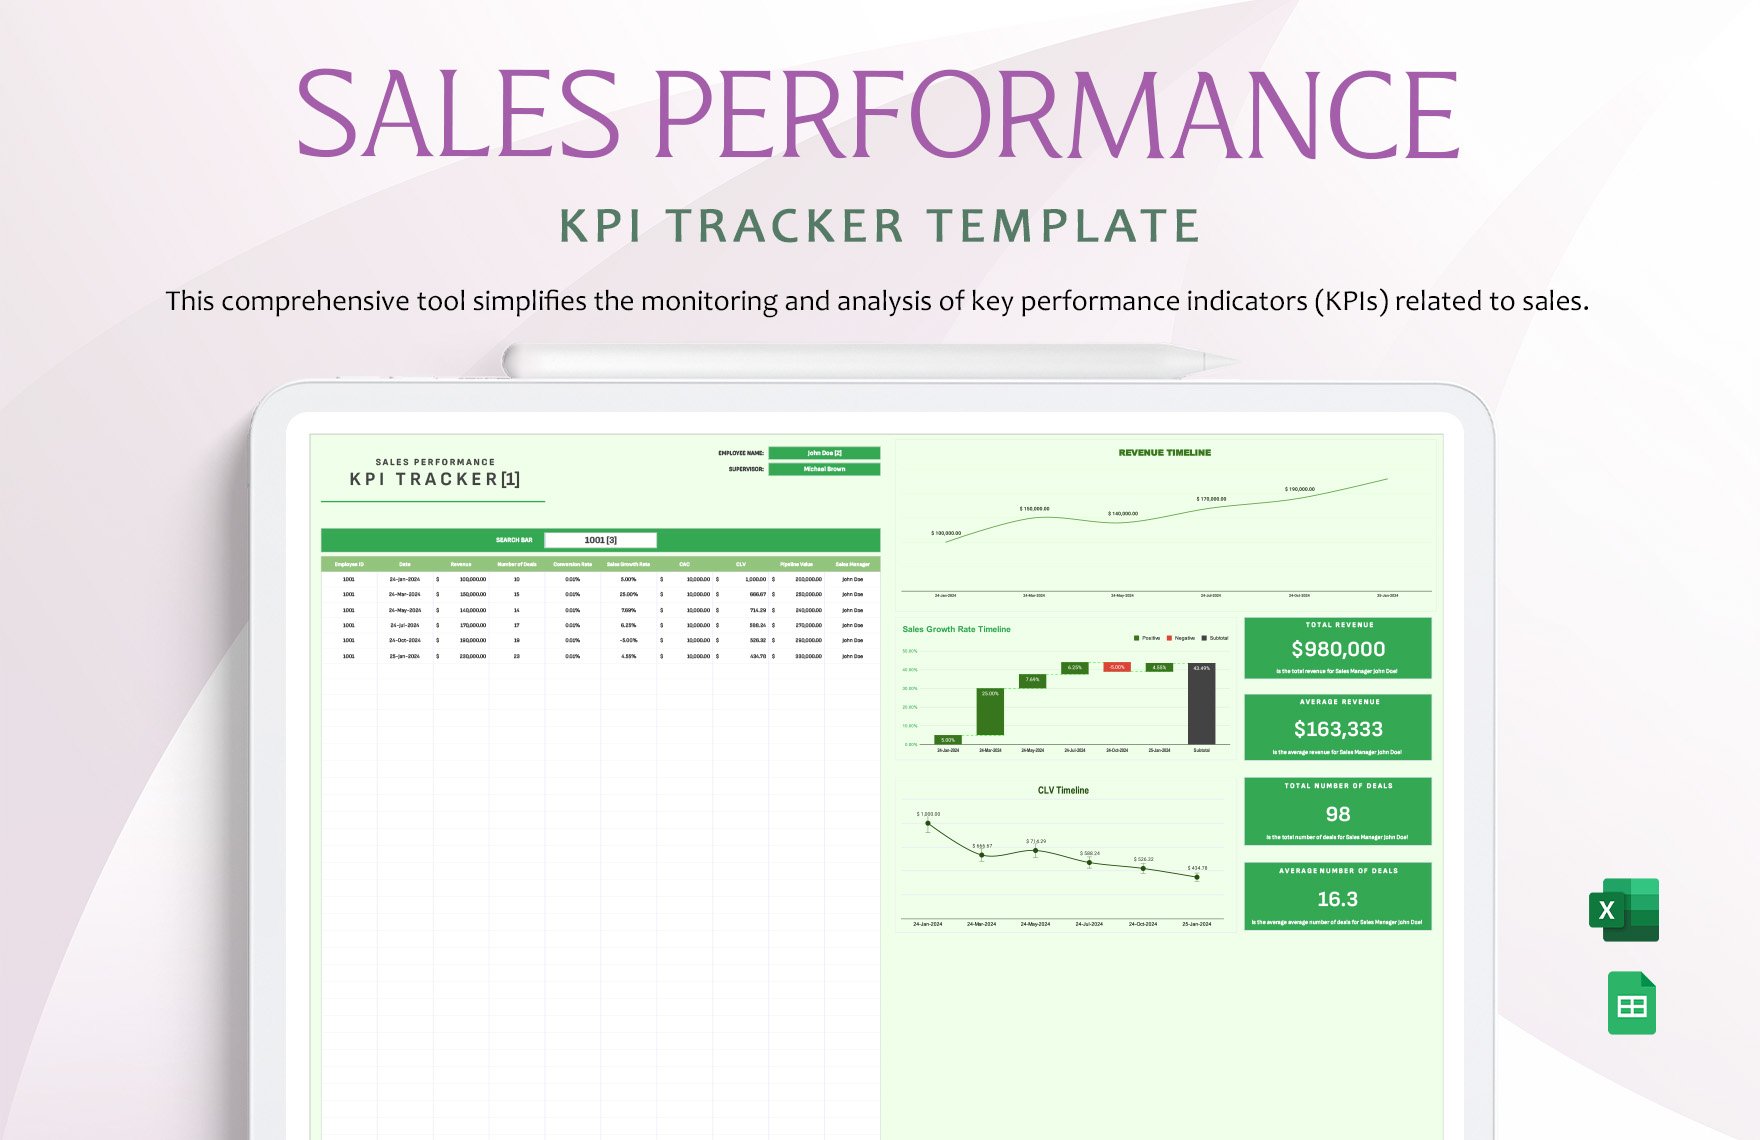 Sales Performance KPI Tracker Template in Excel, Google Sheets